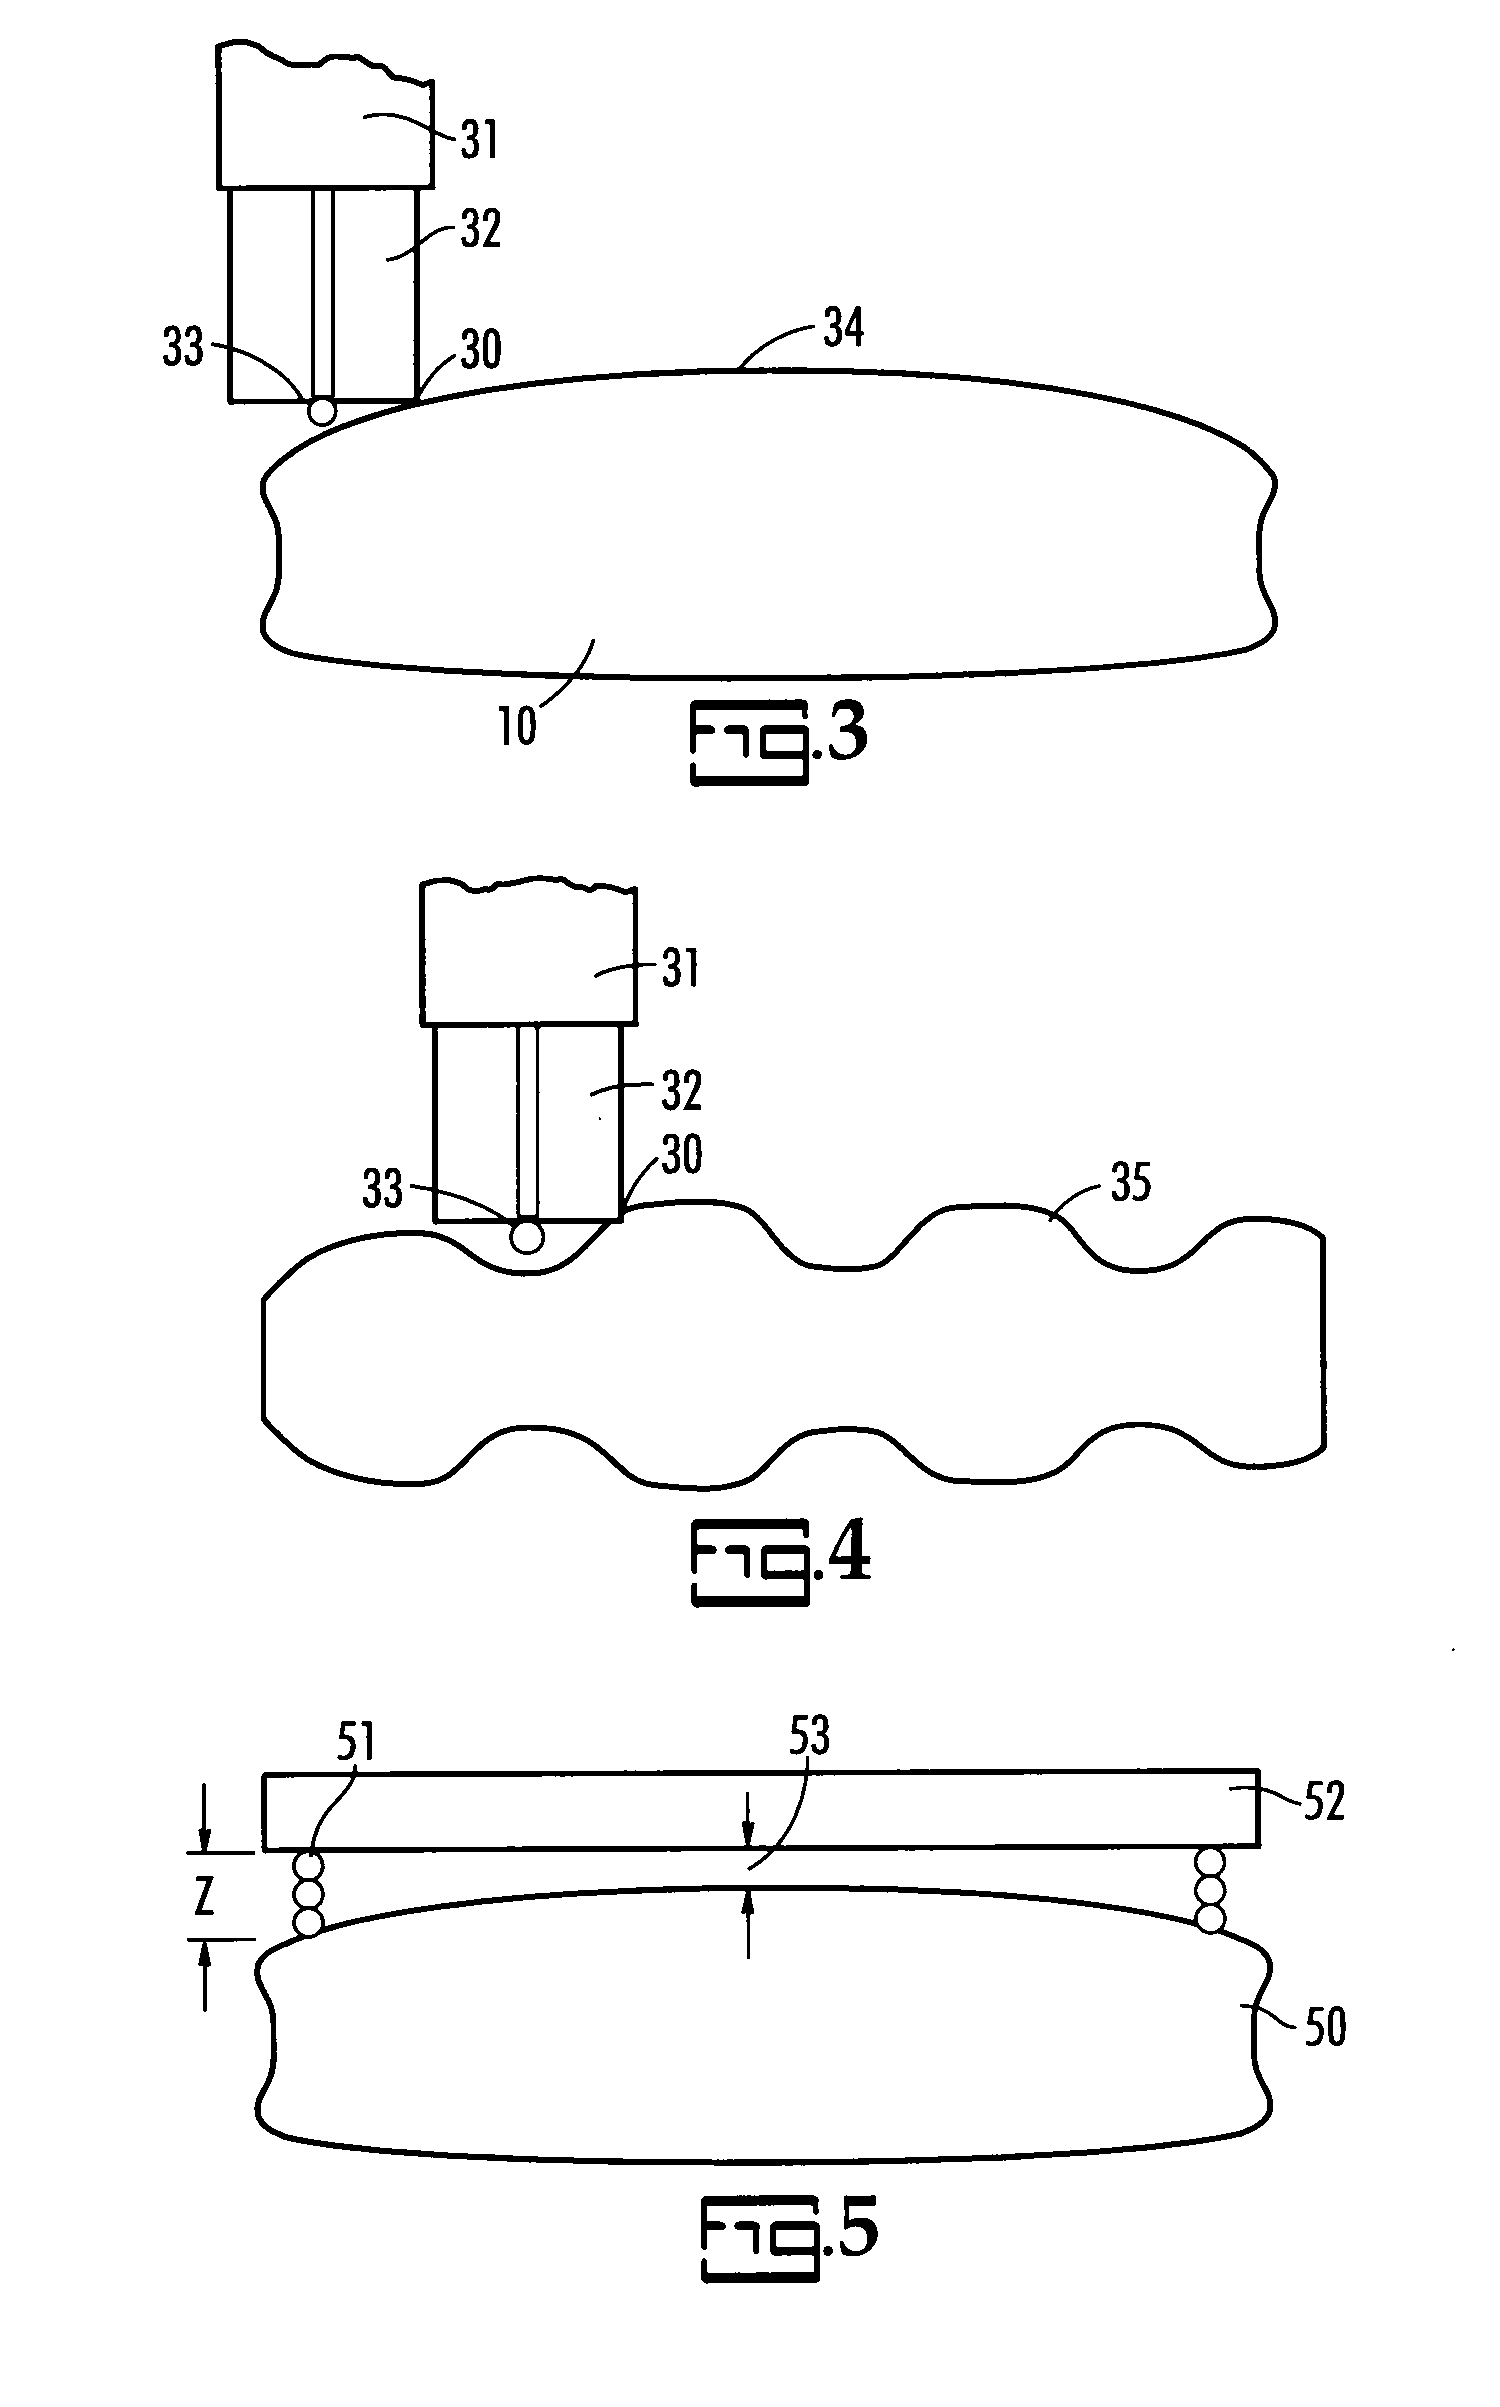 Method of attaching an electronic device to an mlcc having a curved surface